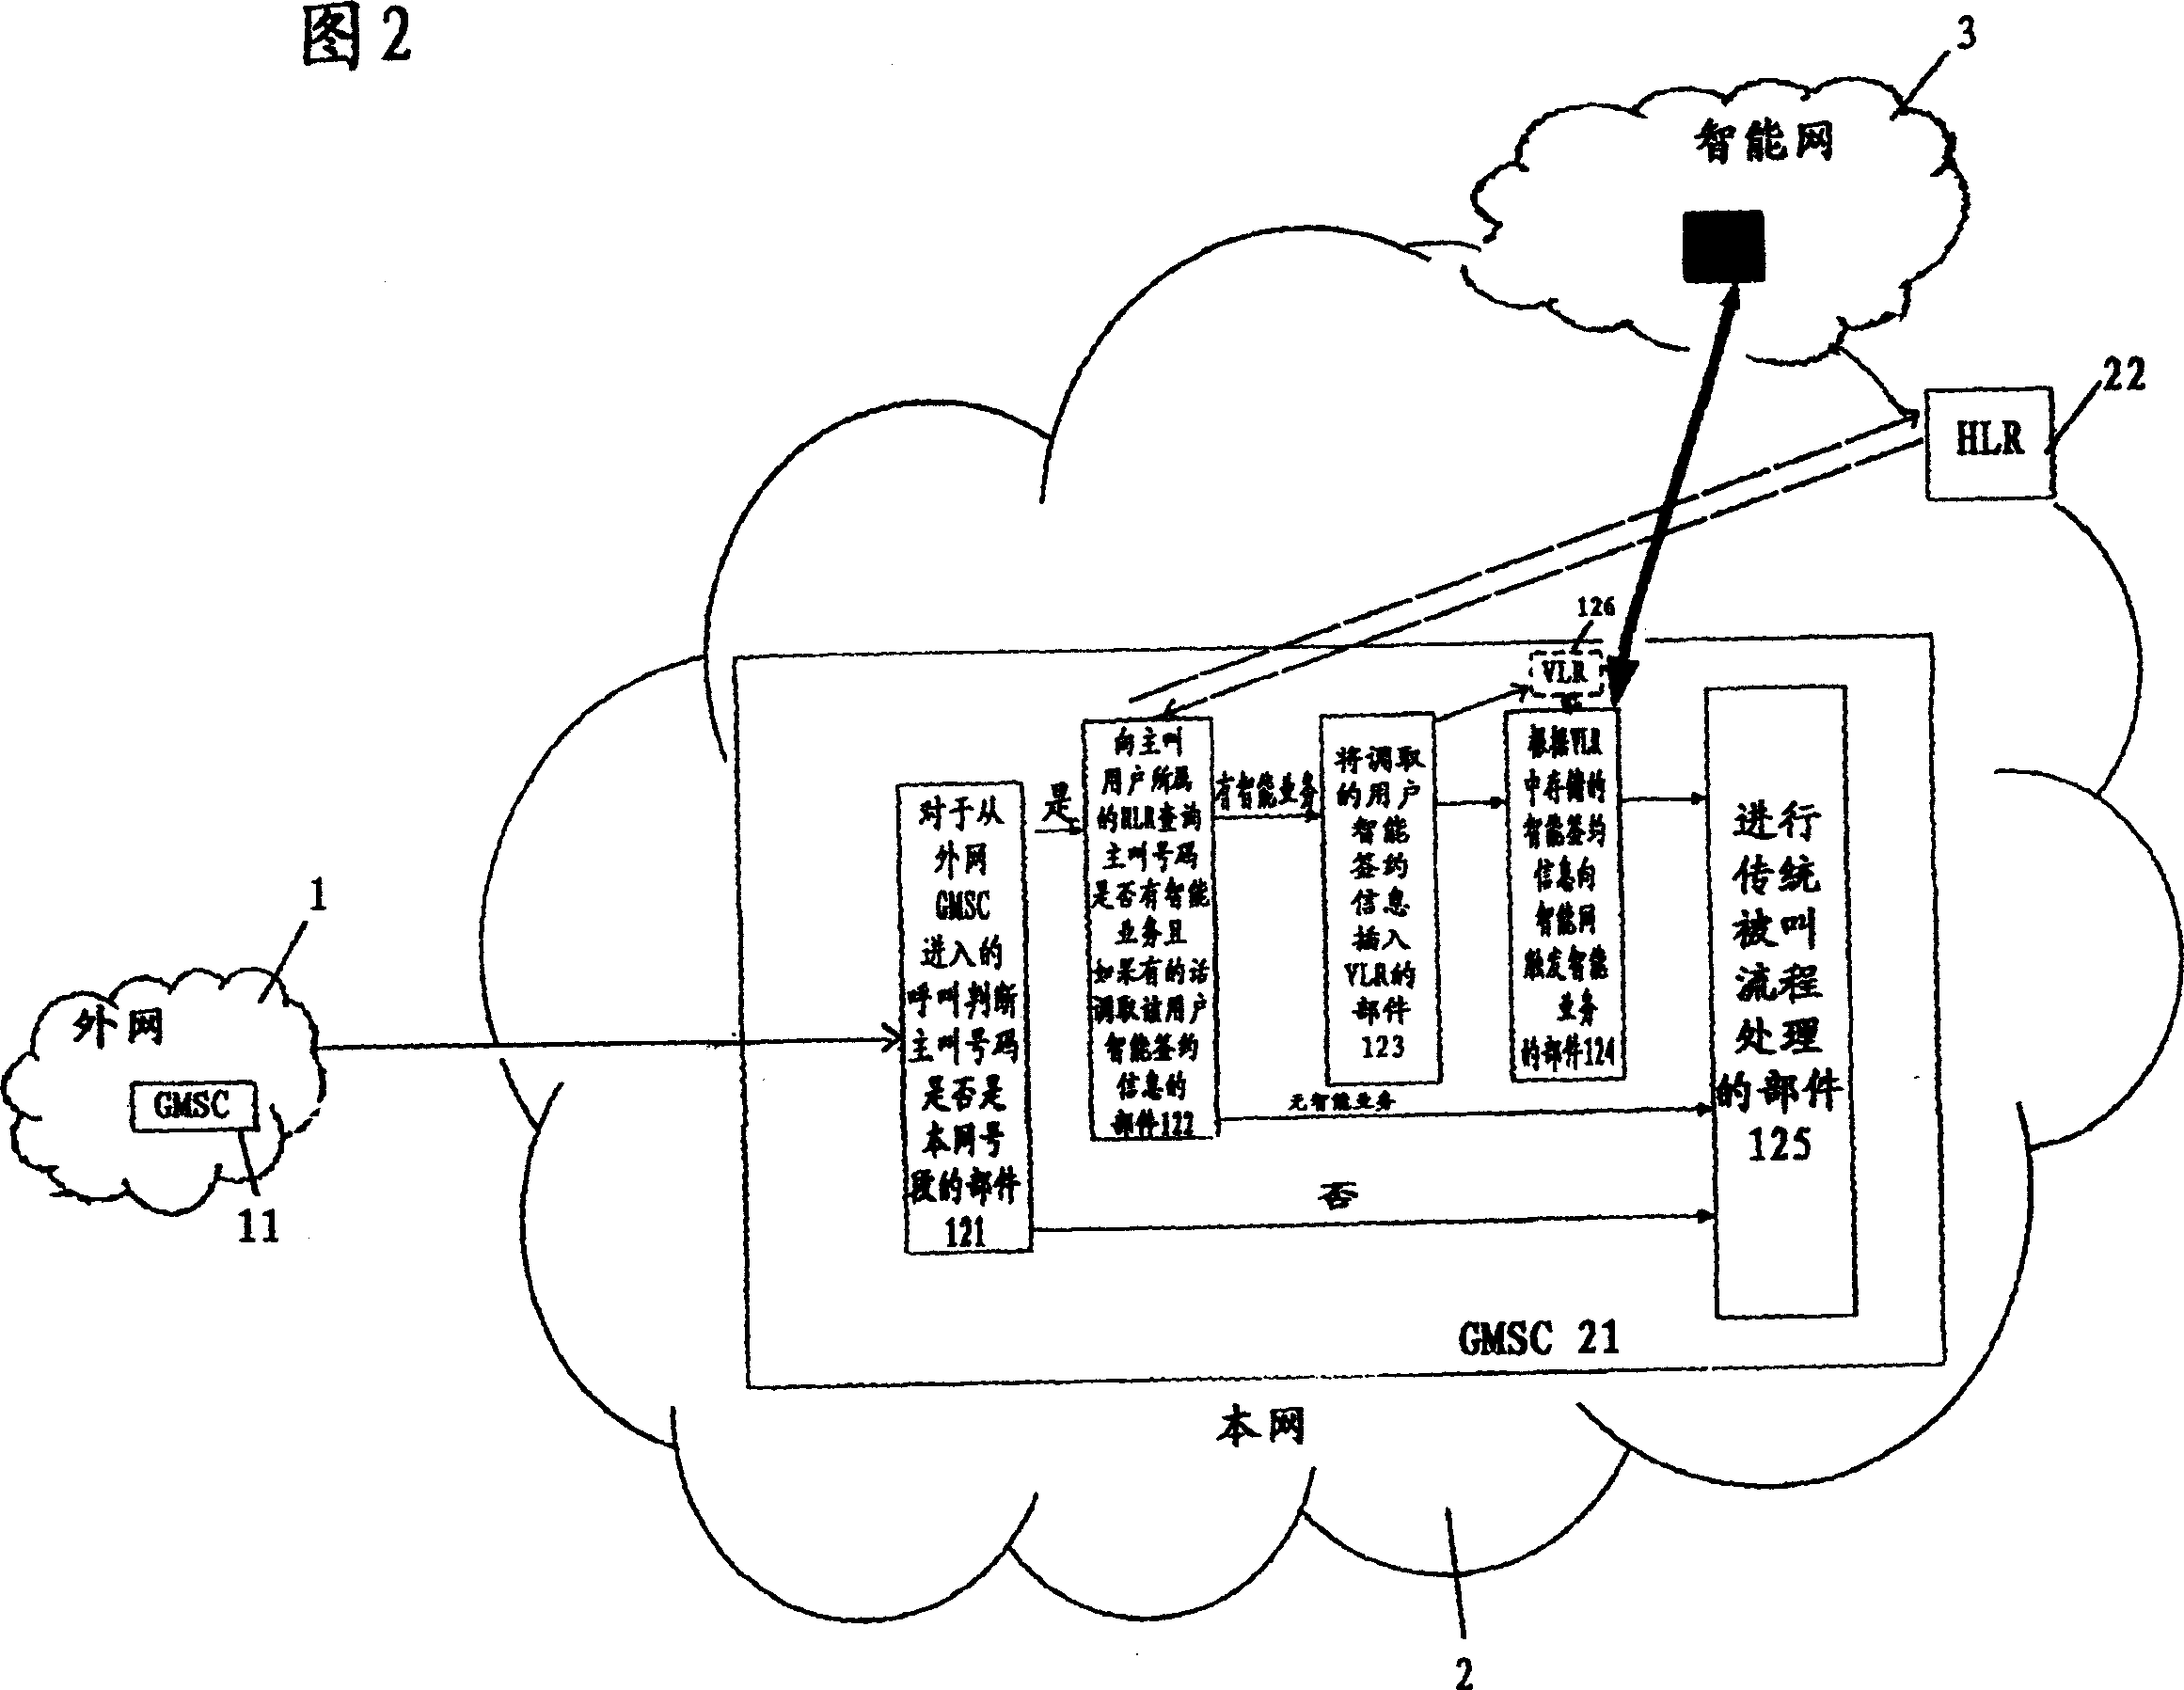 Method for implementing intelligent service at roaming access mode and gateway mobile exchange centre